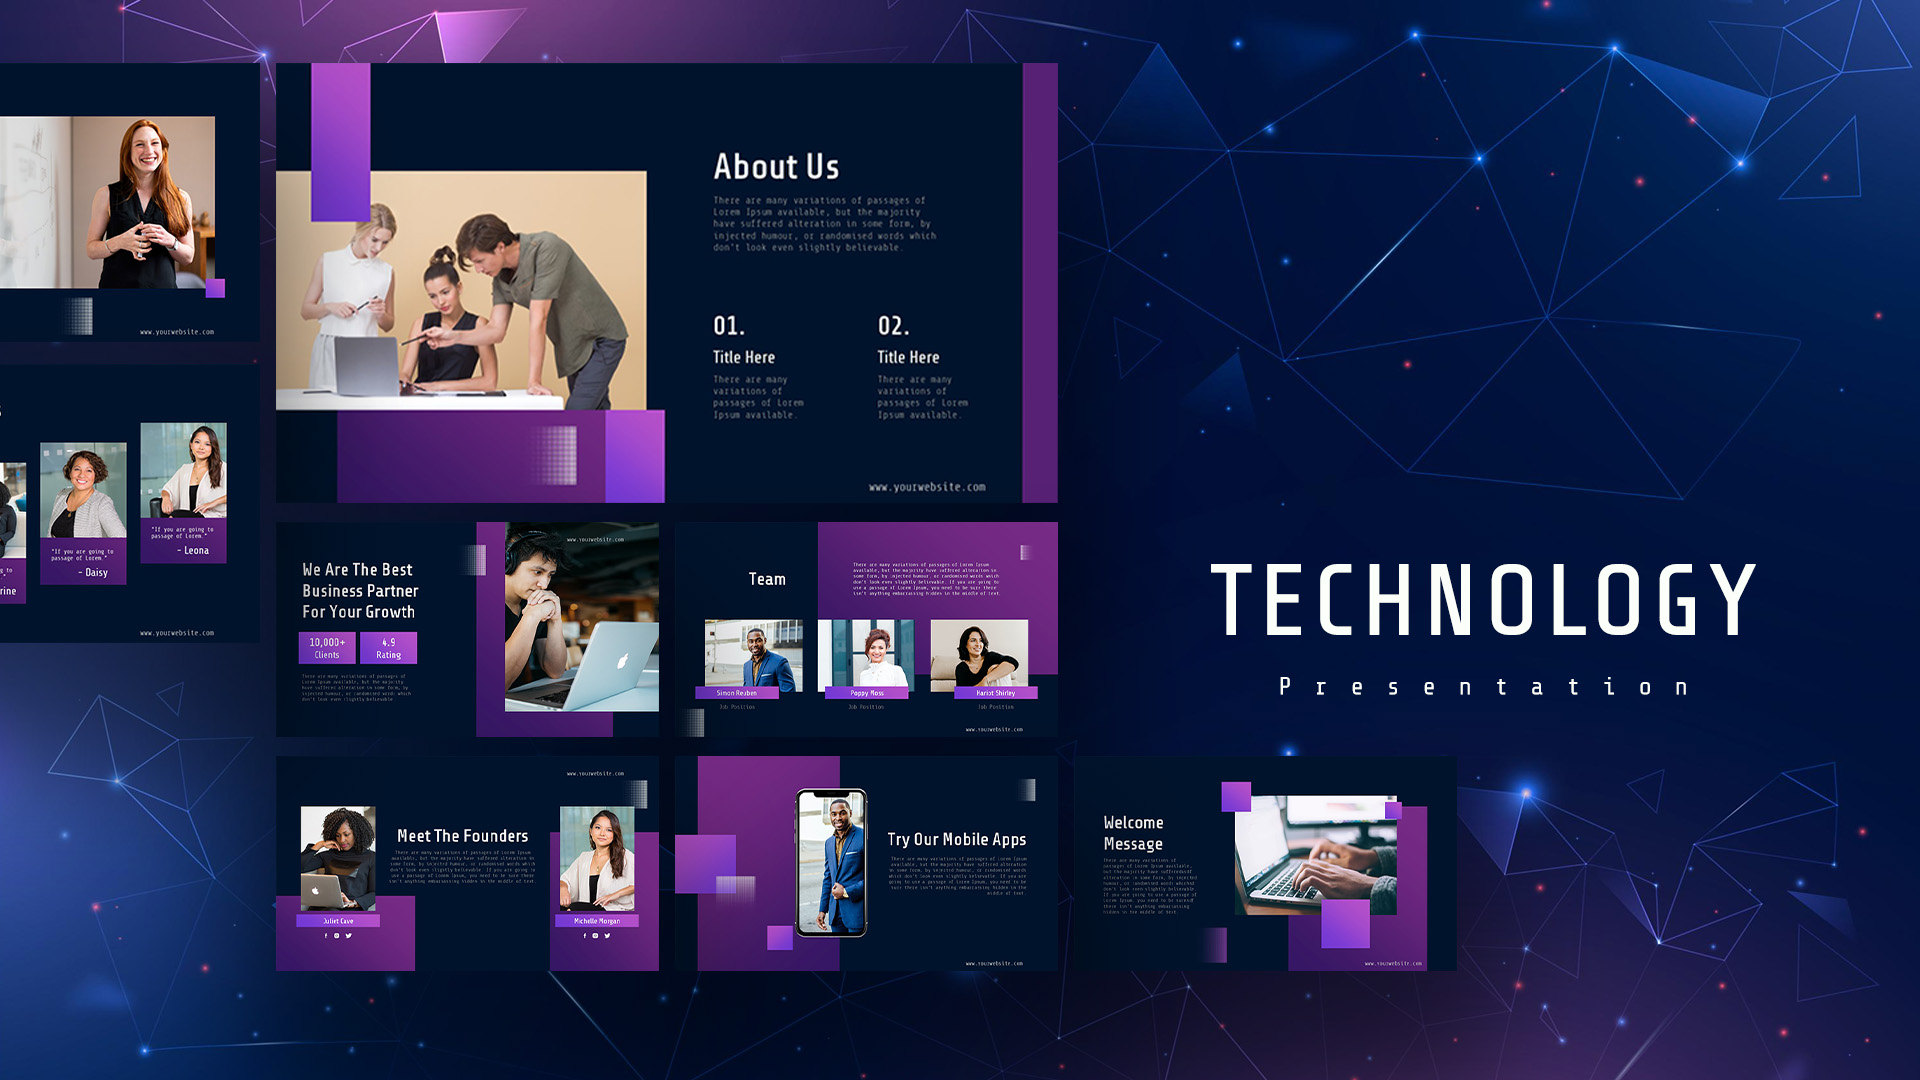 Technology Presentation PowerPoint Templates Cover